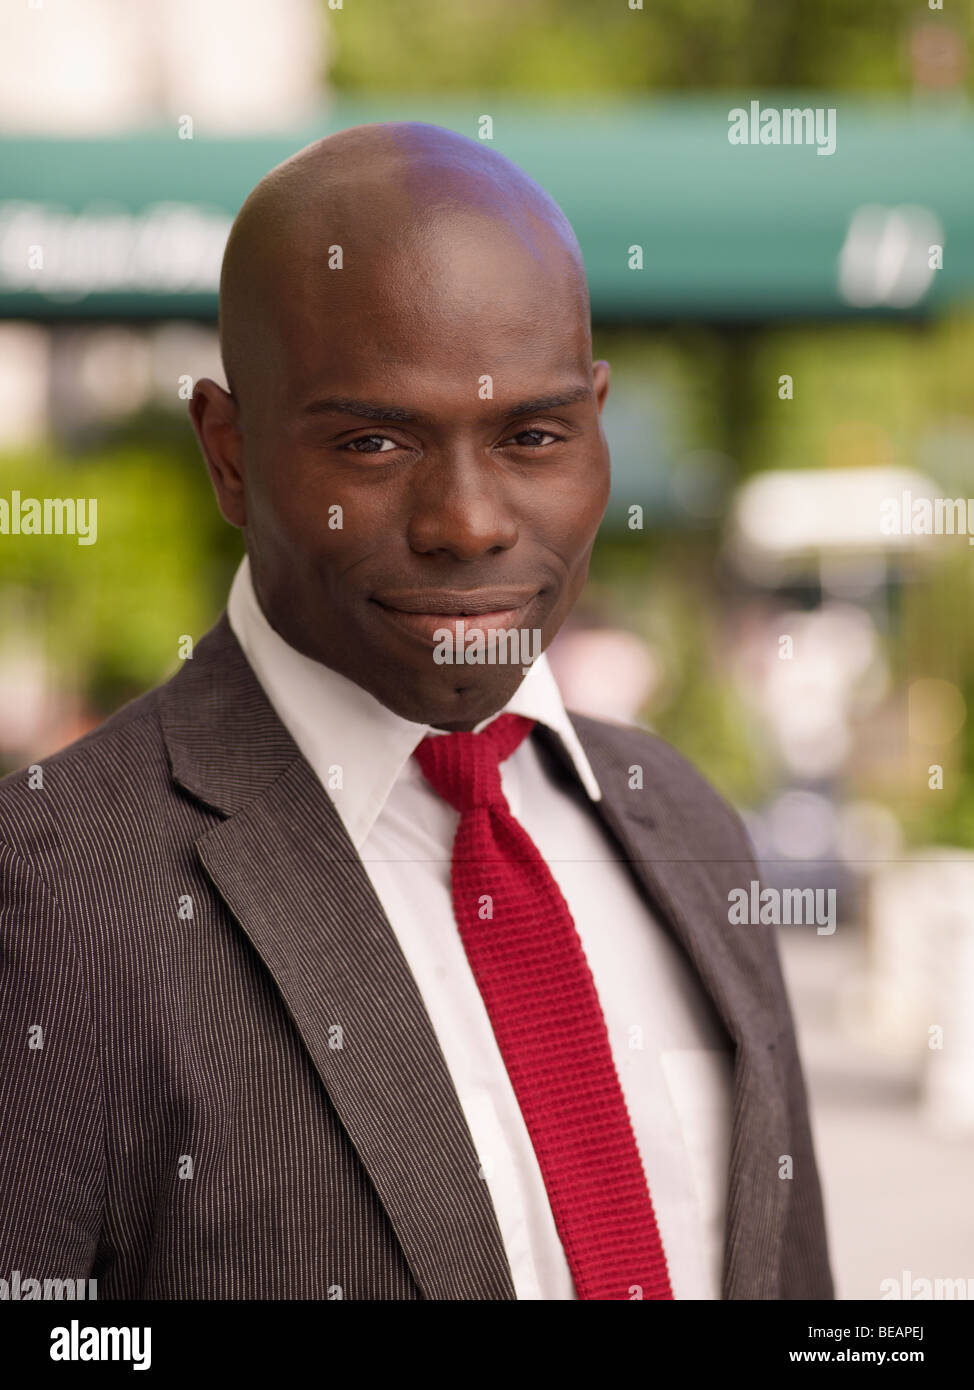 African businessman smiling Stock Photo